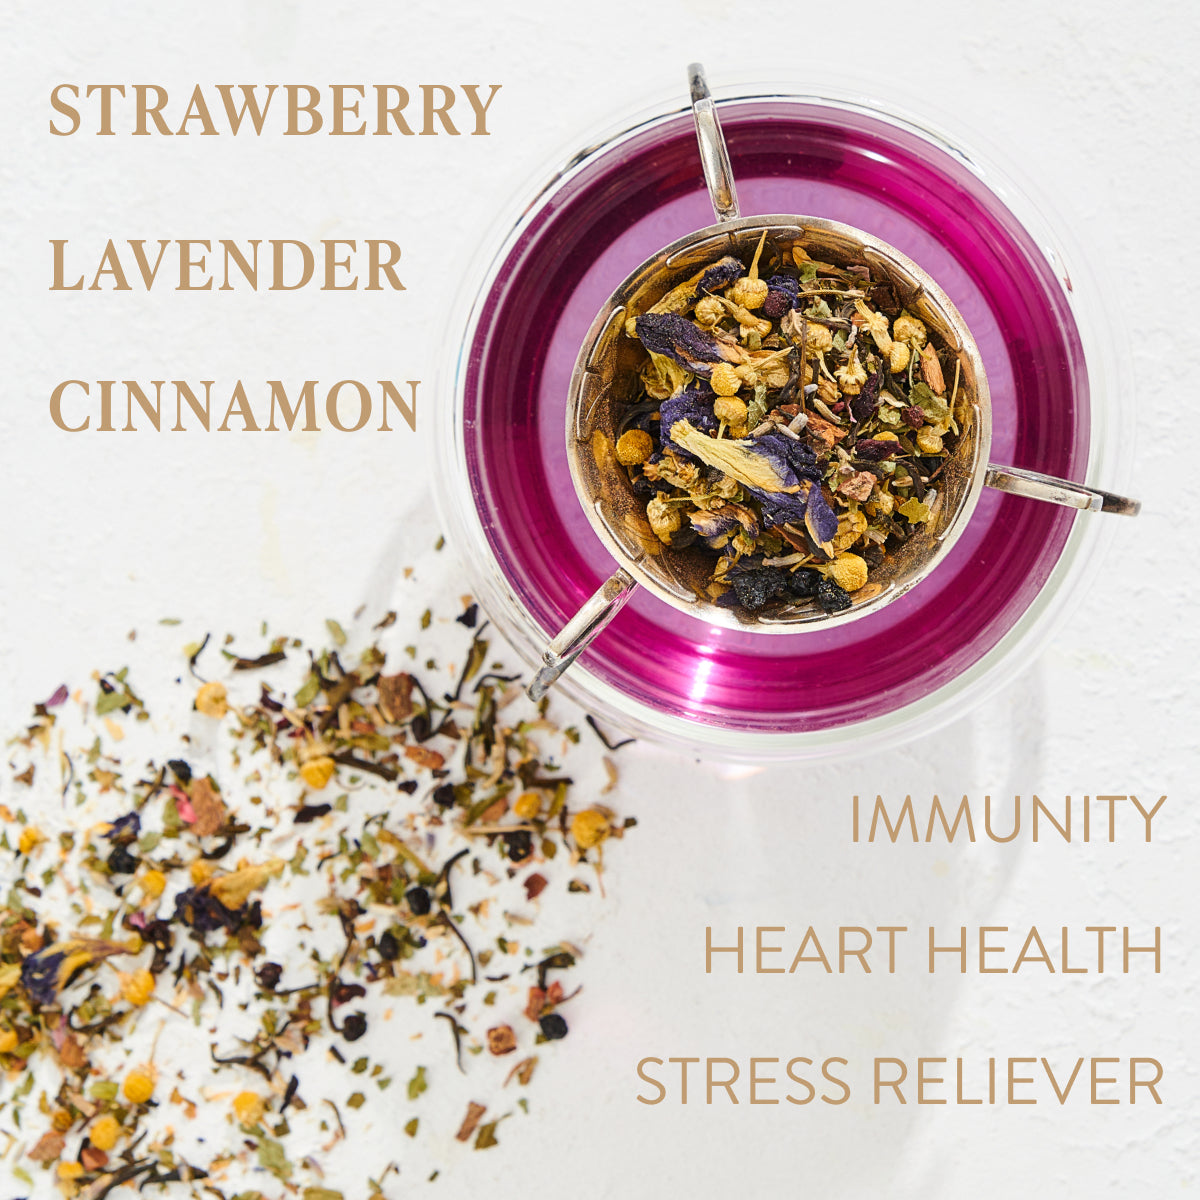 A top view of a glass teacup containing vibrant purple organic tea with various loose herbs. Surrounding the cup are scattered herbs. Text on the image lists ingredients and benefits: "Strawberry, Lavender, Cinnamon" and "Immunity, Heart Health, Stress Reliever." Discover Symbeeosis: Beautifying Immunitea for the Queen Bee by Magic Hour today.